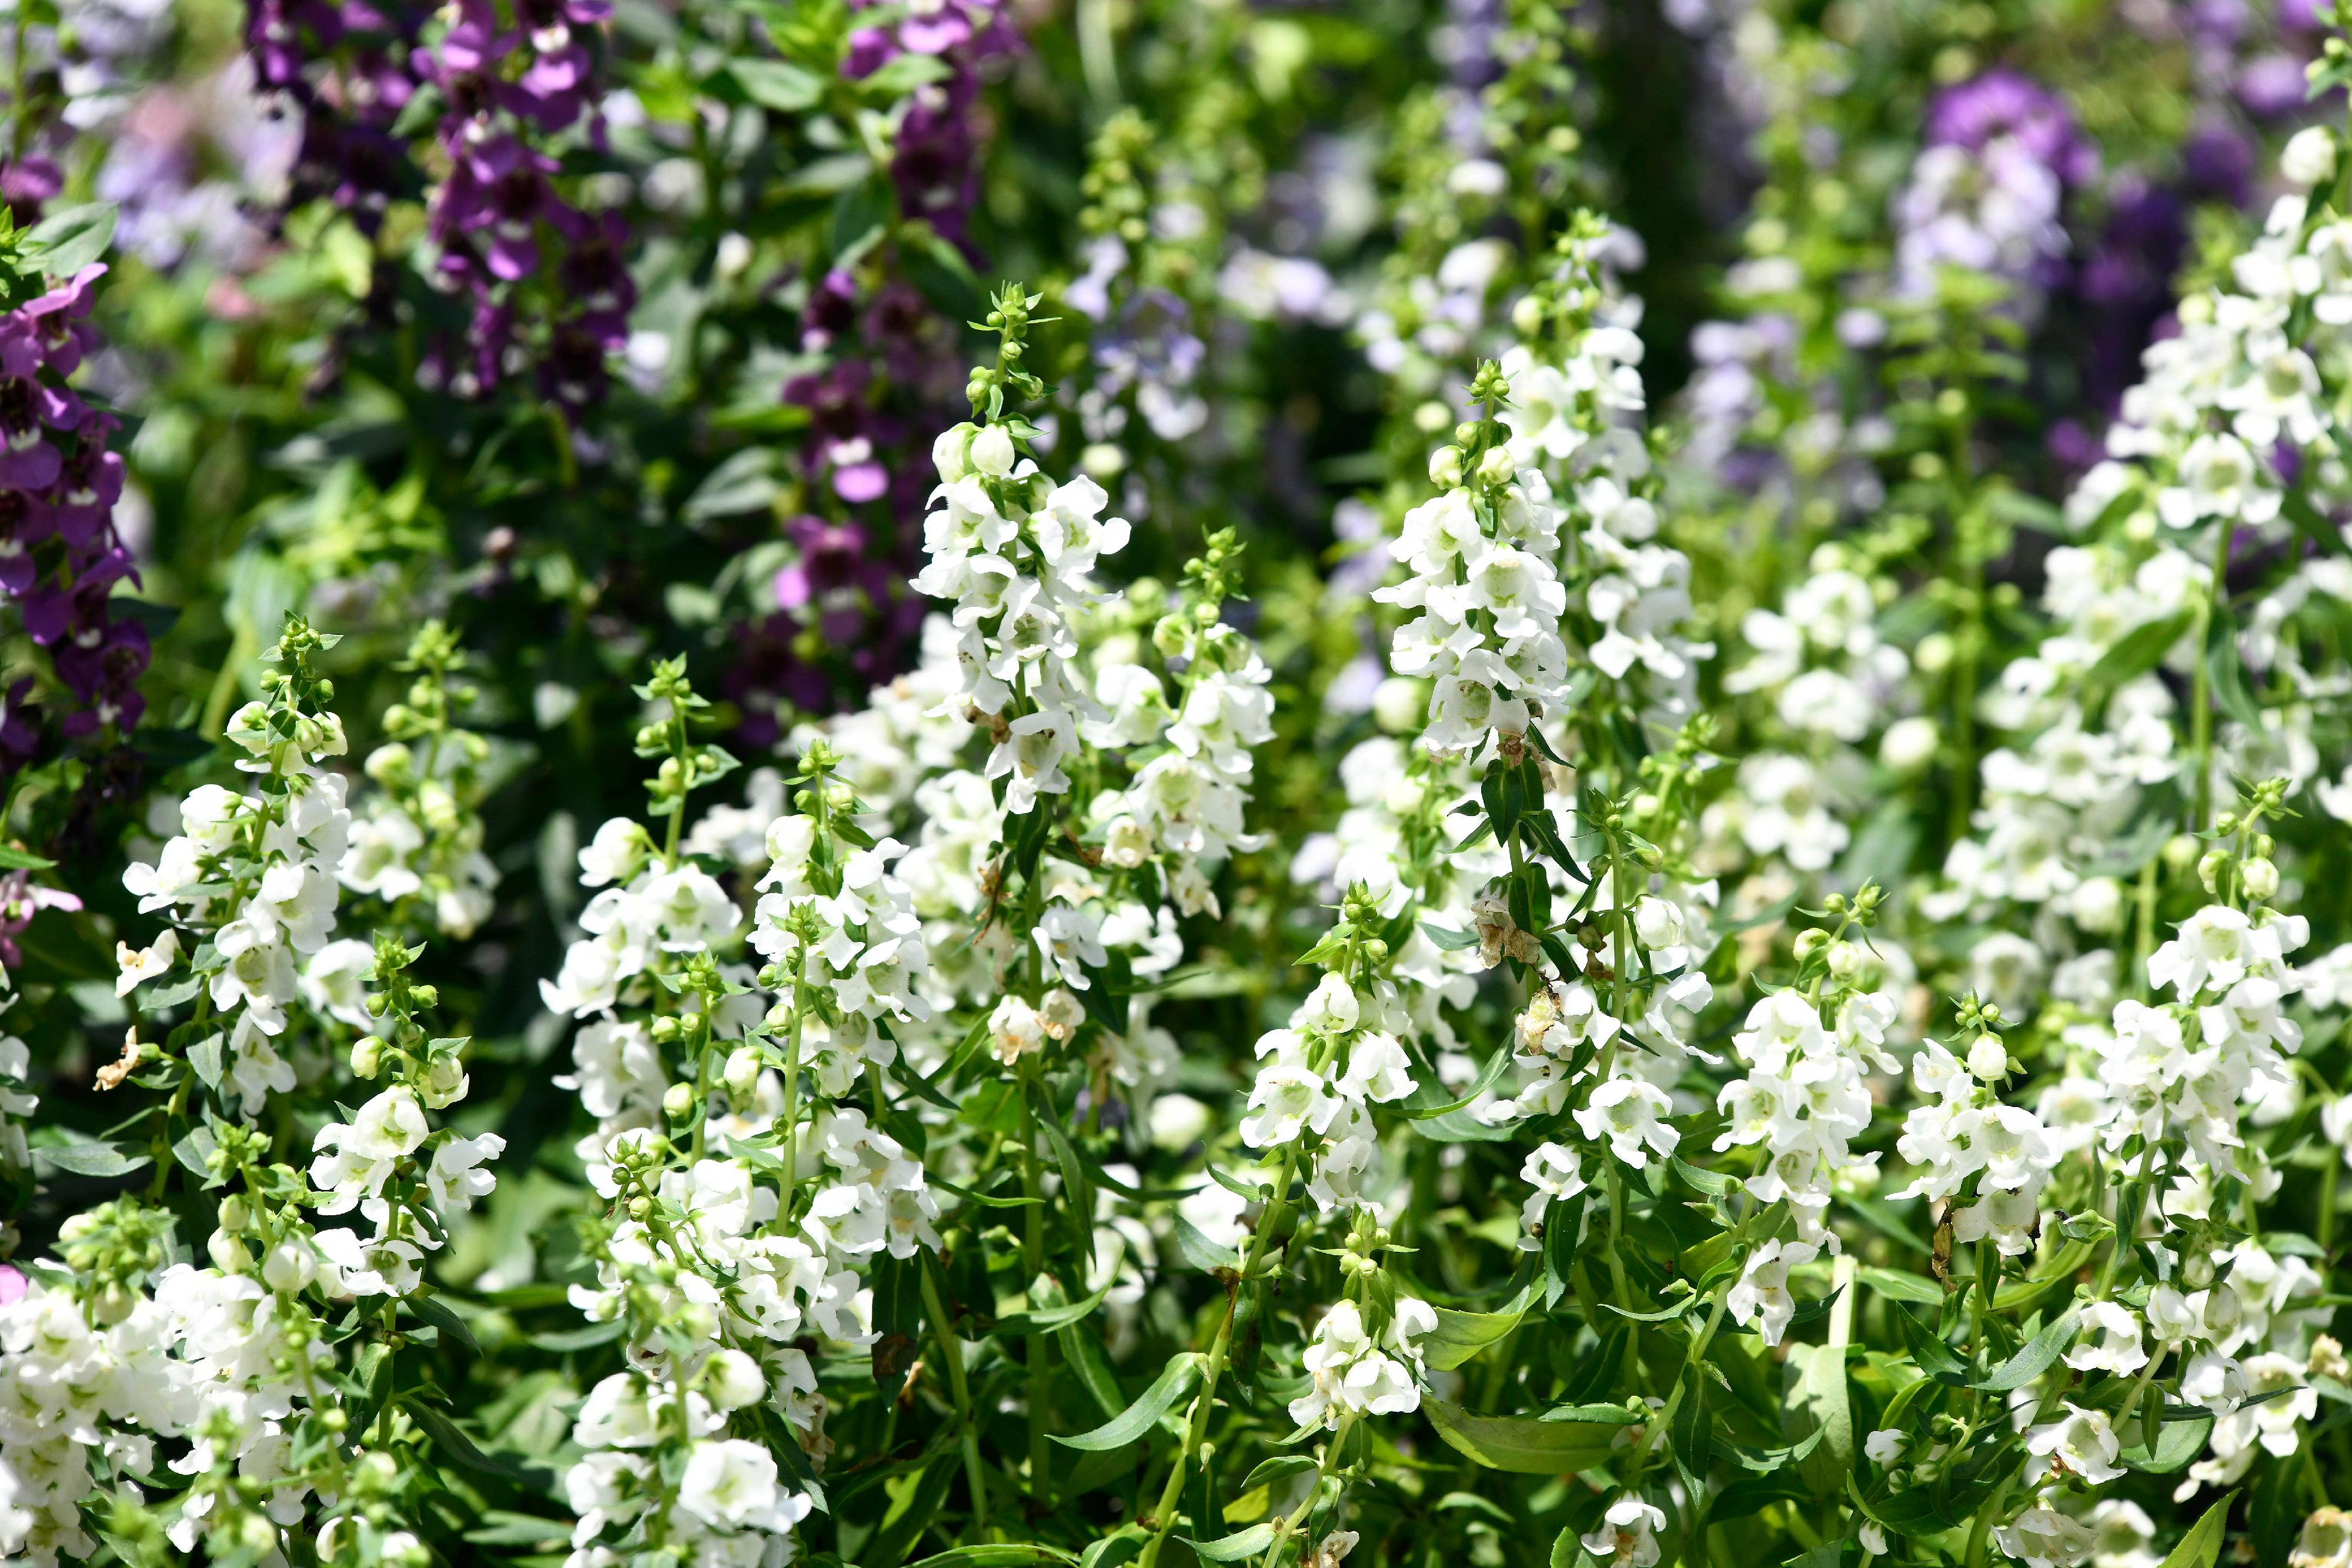 The Hong Kong Flower Show will be held at Victoria Park for 10 days from March 15 to 24, featuring the colourful angelonia as the theme flower and "Floral Joy Around Town" as the main theme. There are many species of angelonia, with heights ranging from 30 to 100 centimetres, offering a profusion of flowers.
